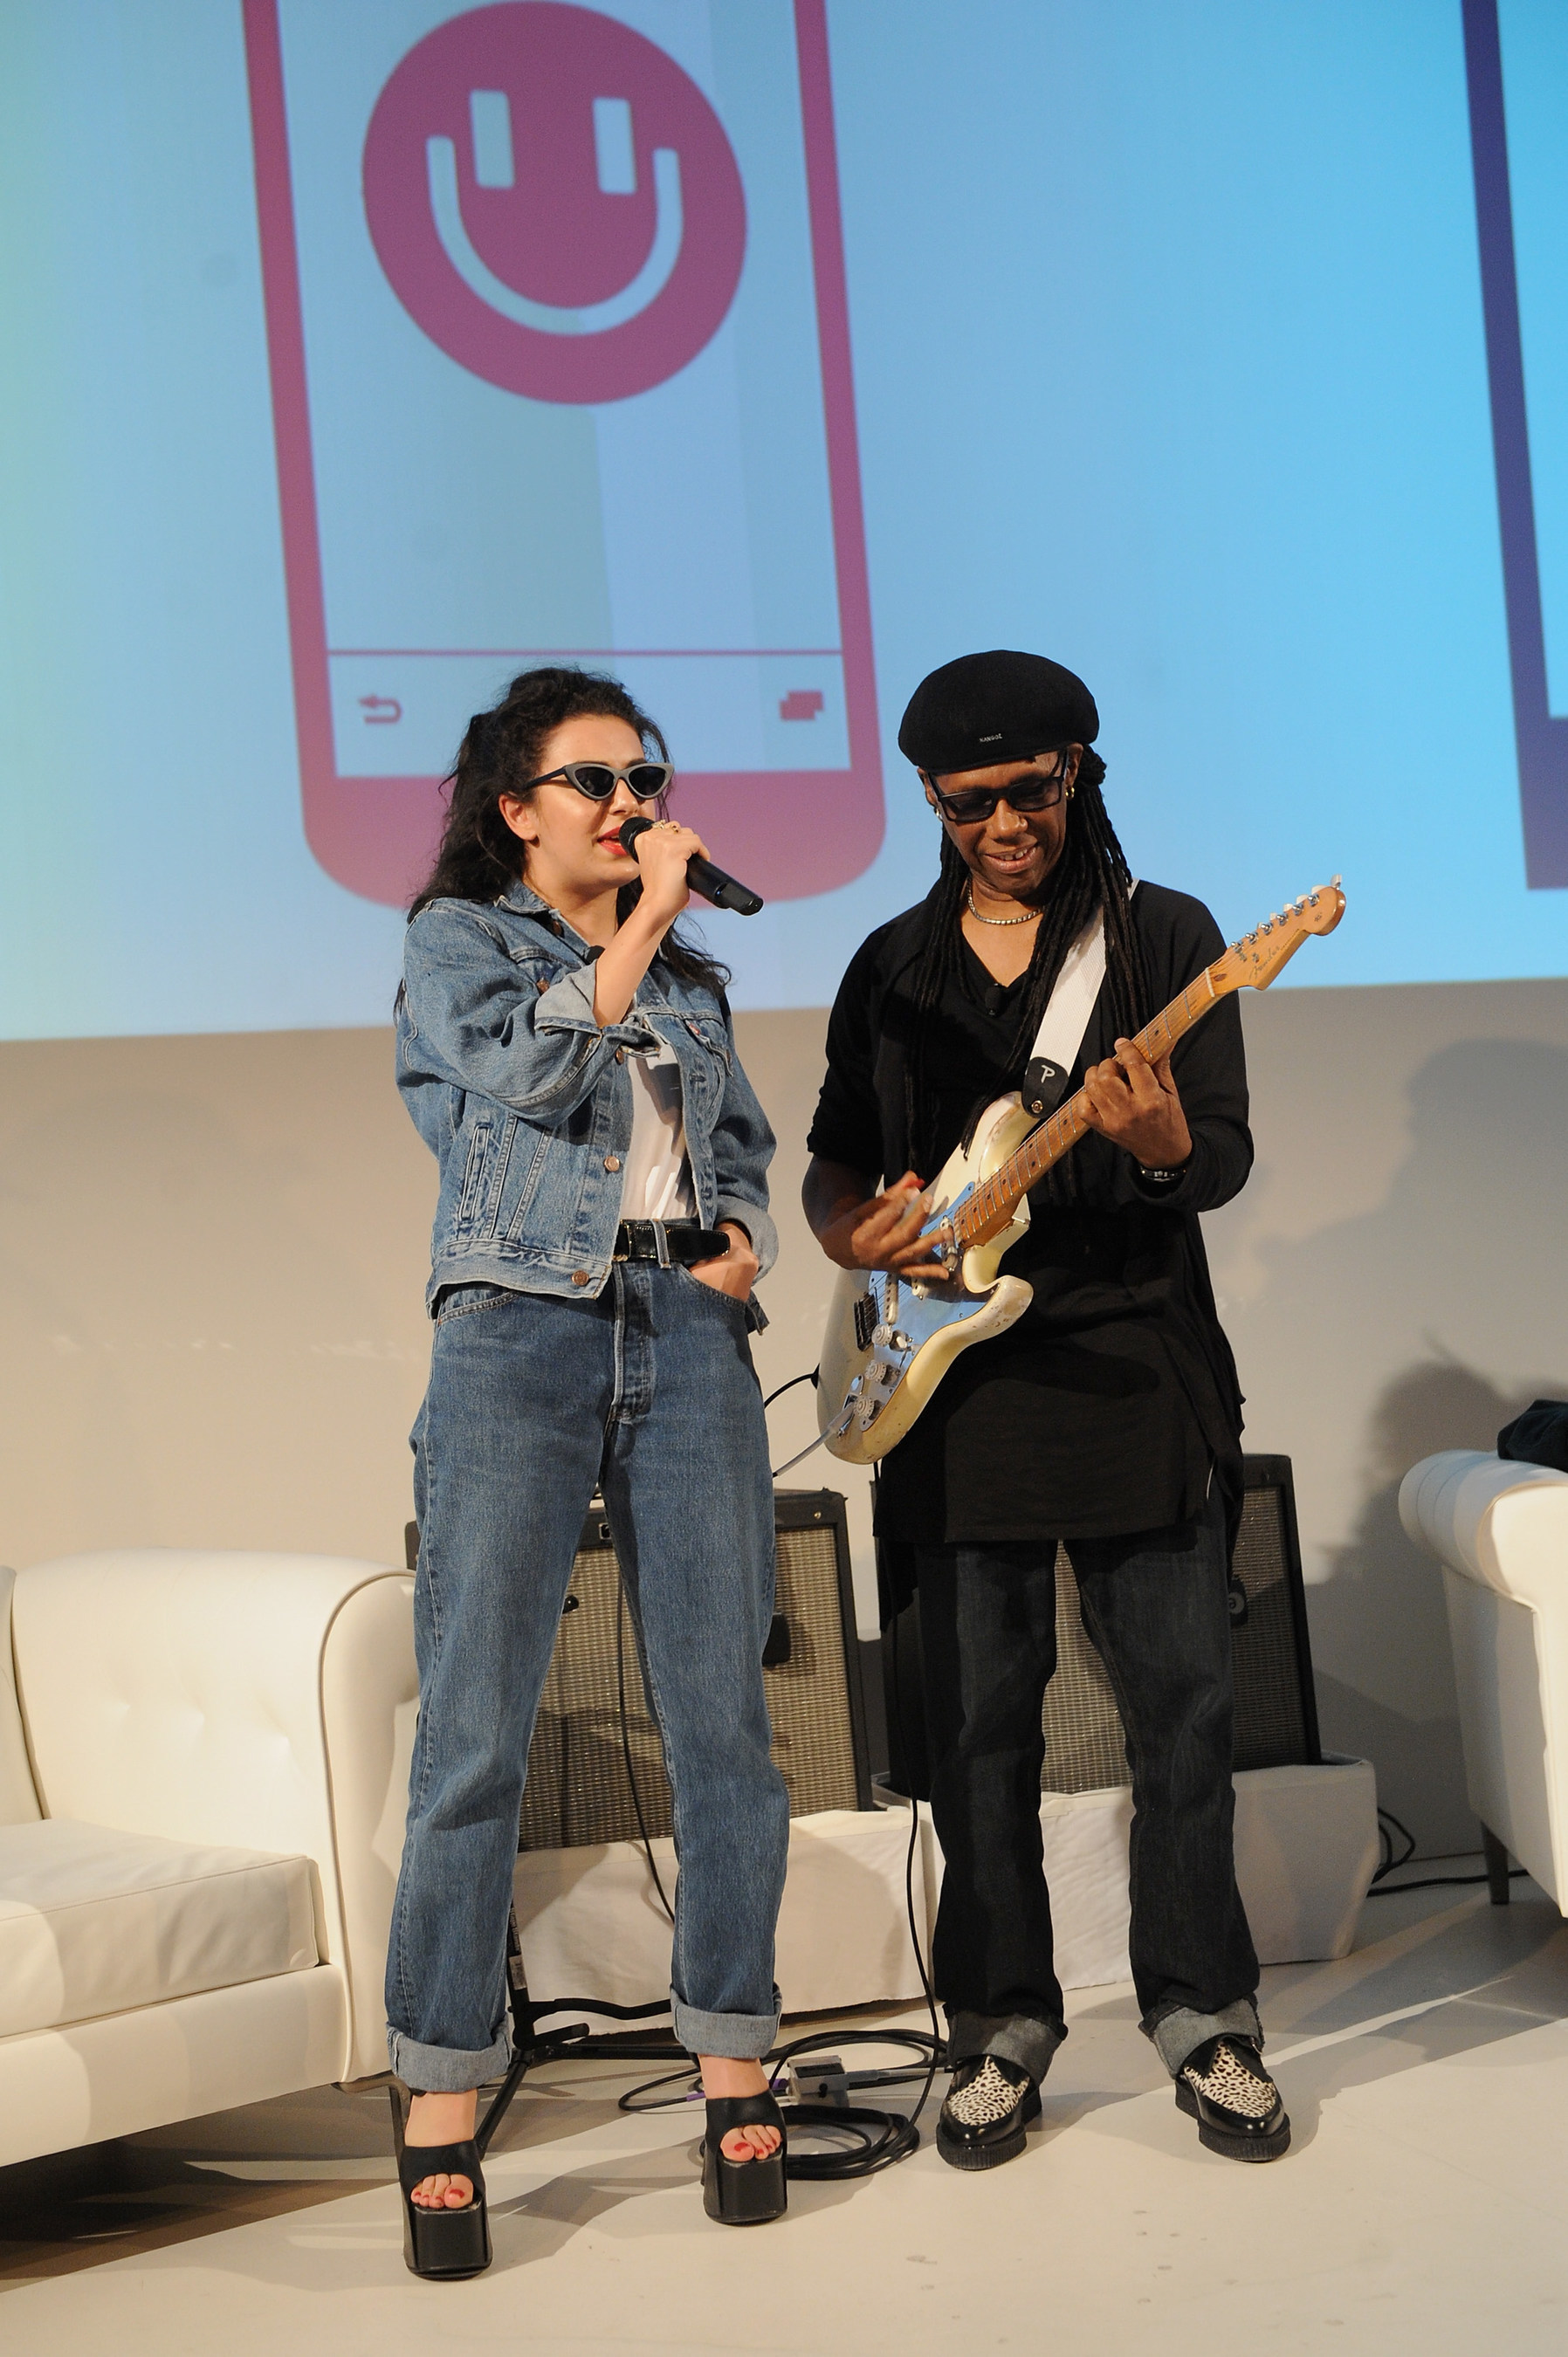 NEW YORK, NY - MAY 19:  Singer-songwriter Charli XCX and musician Nile Rodgers perform on stage at the MixRadio iOS and Android launch event at 404 on May 19, 2015 in New York City.  (Photo by Brad Barket/Getty Images for MixRadio)